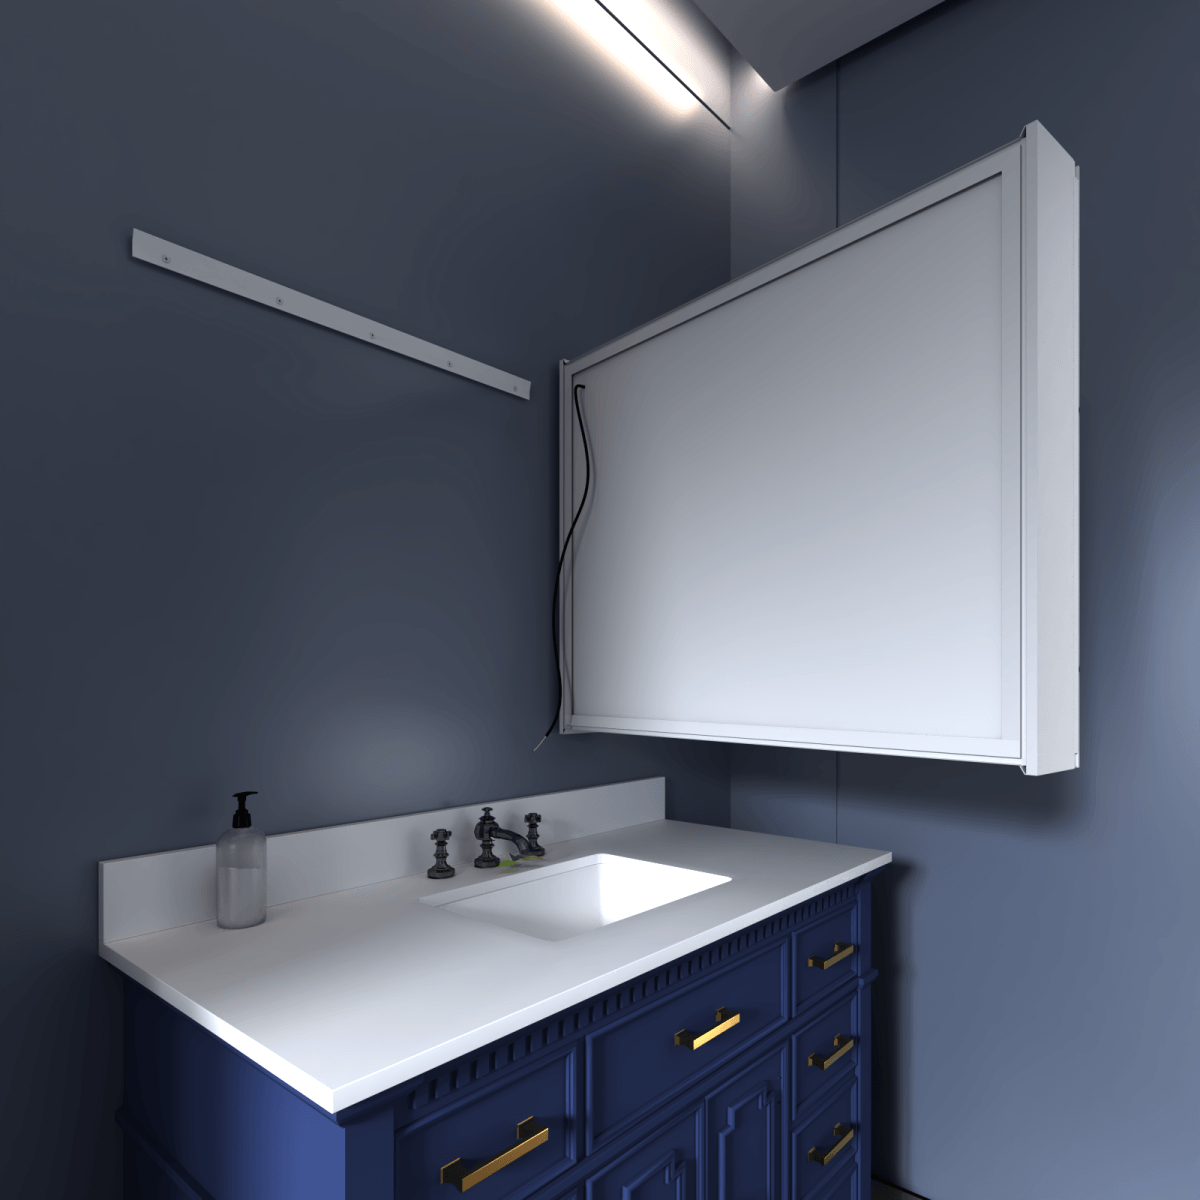 ExBrite 30" W x 30" H Square Led Lighted Mirror Medicine Cabinet Recessed or Surface Mount,Defog - ExBriteUSA